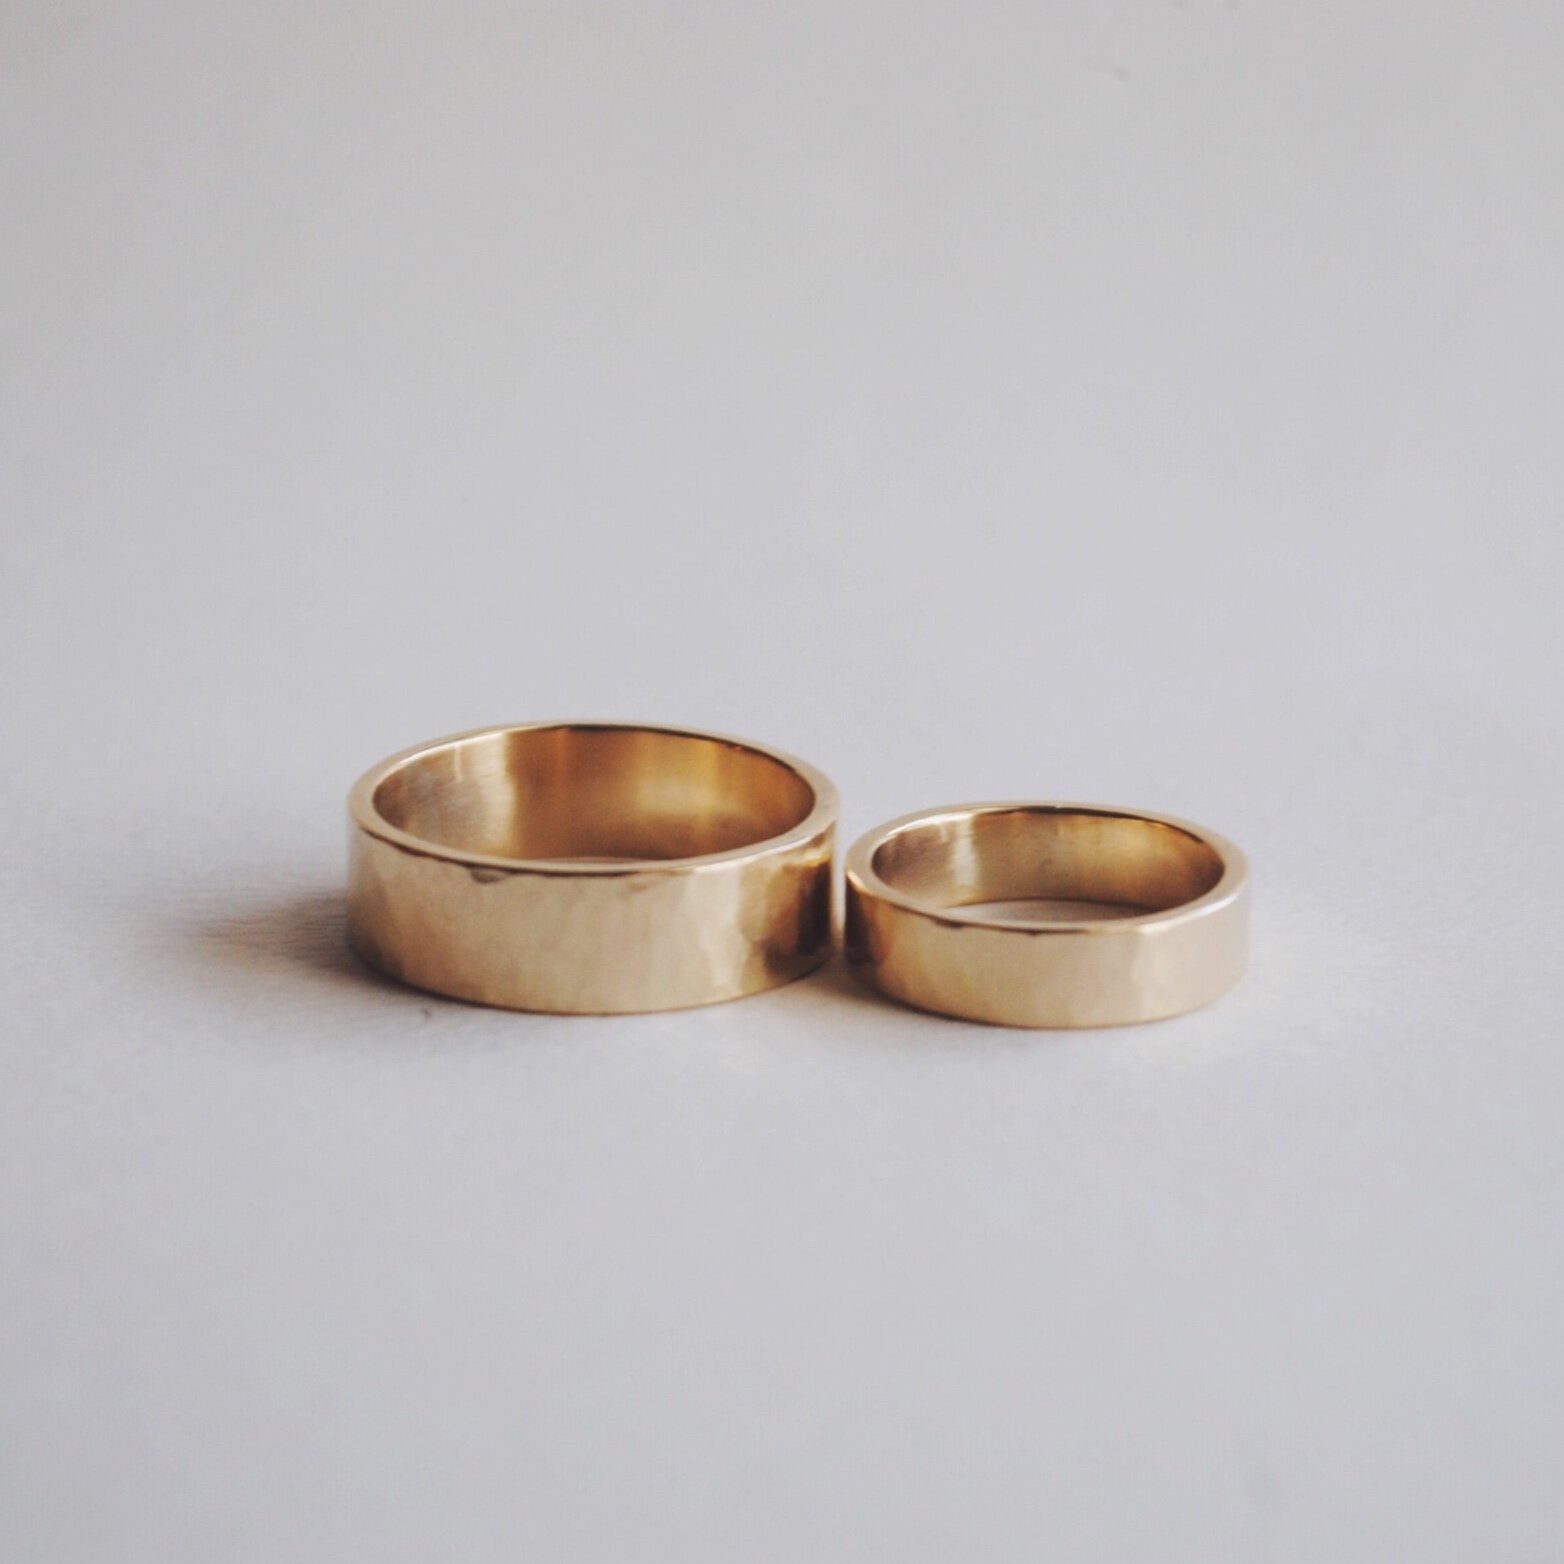 Recycled 18carat Gold Wedding Rings Hammered Textured Band 